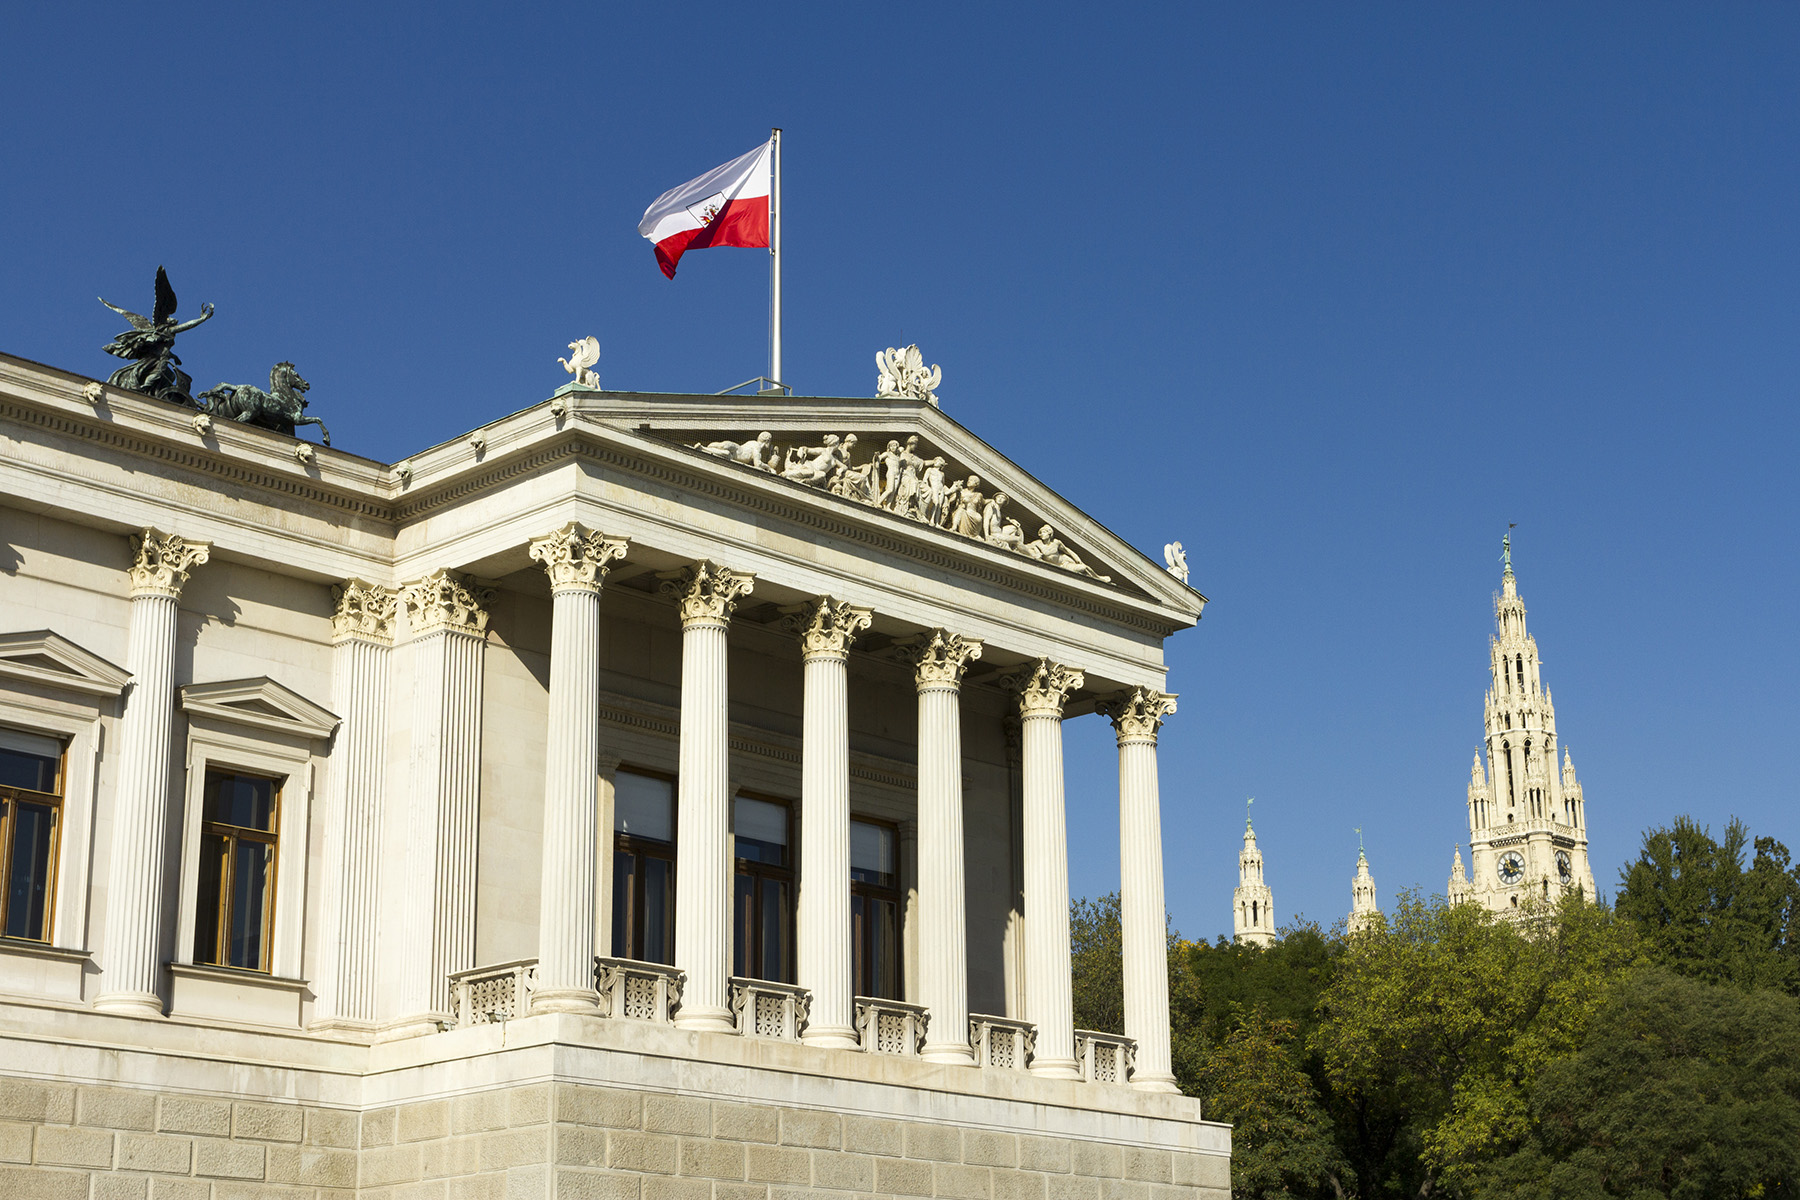 Exterior of the Austrian Parliament Building in Vienna, flag on top, day time